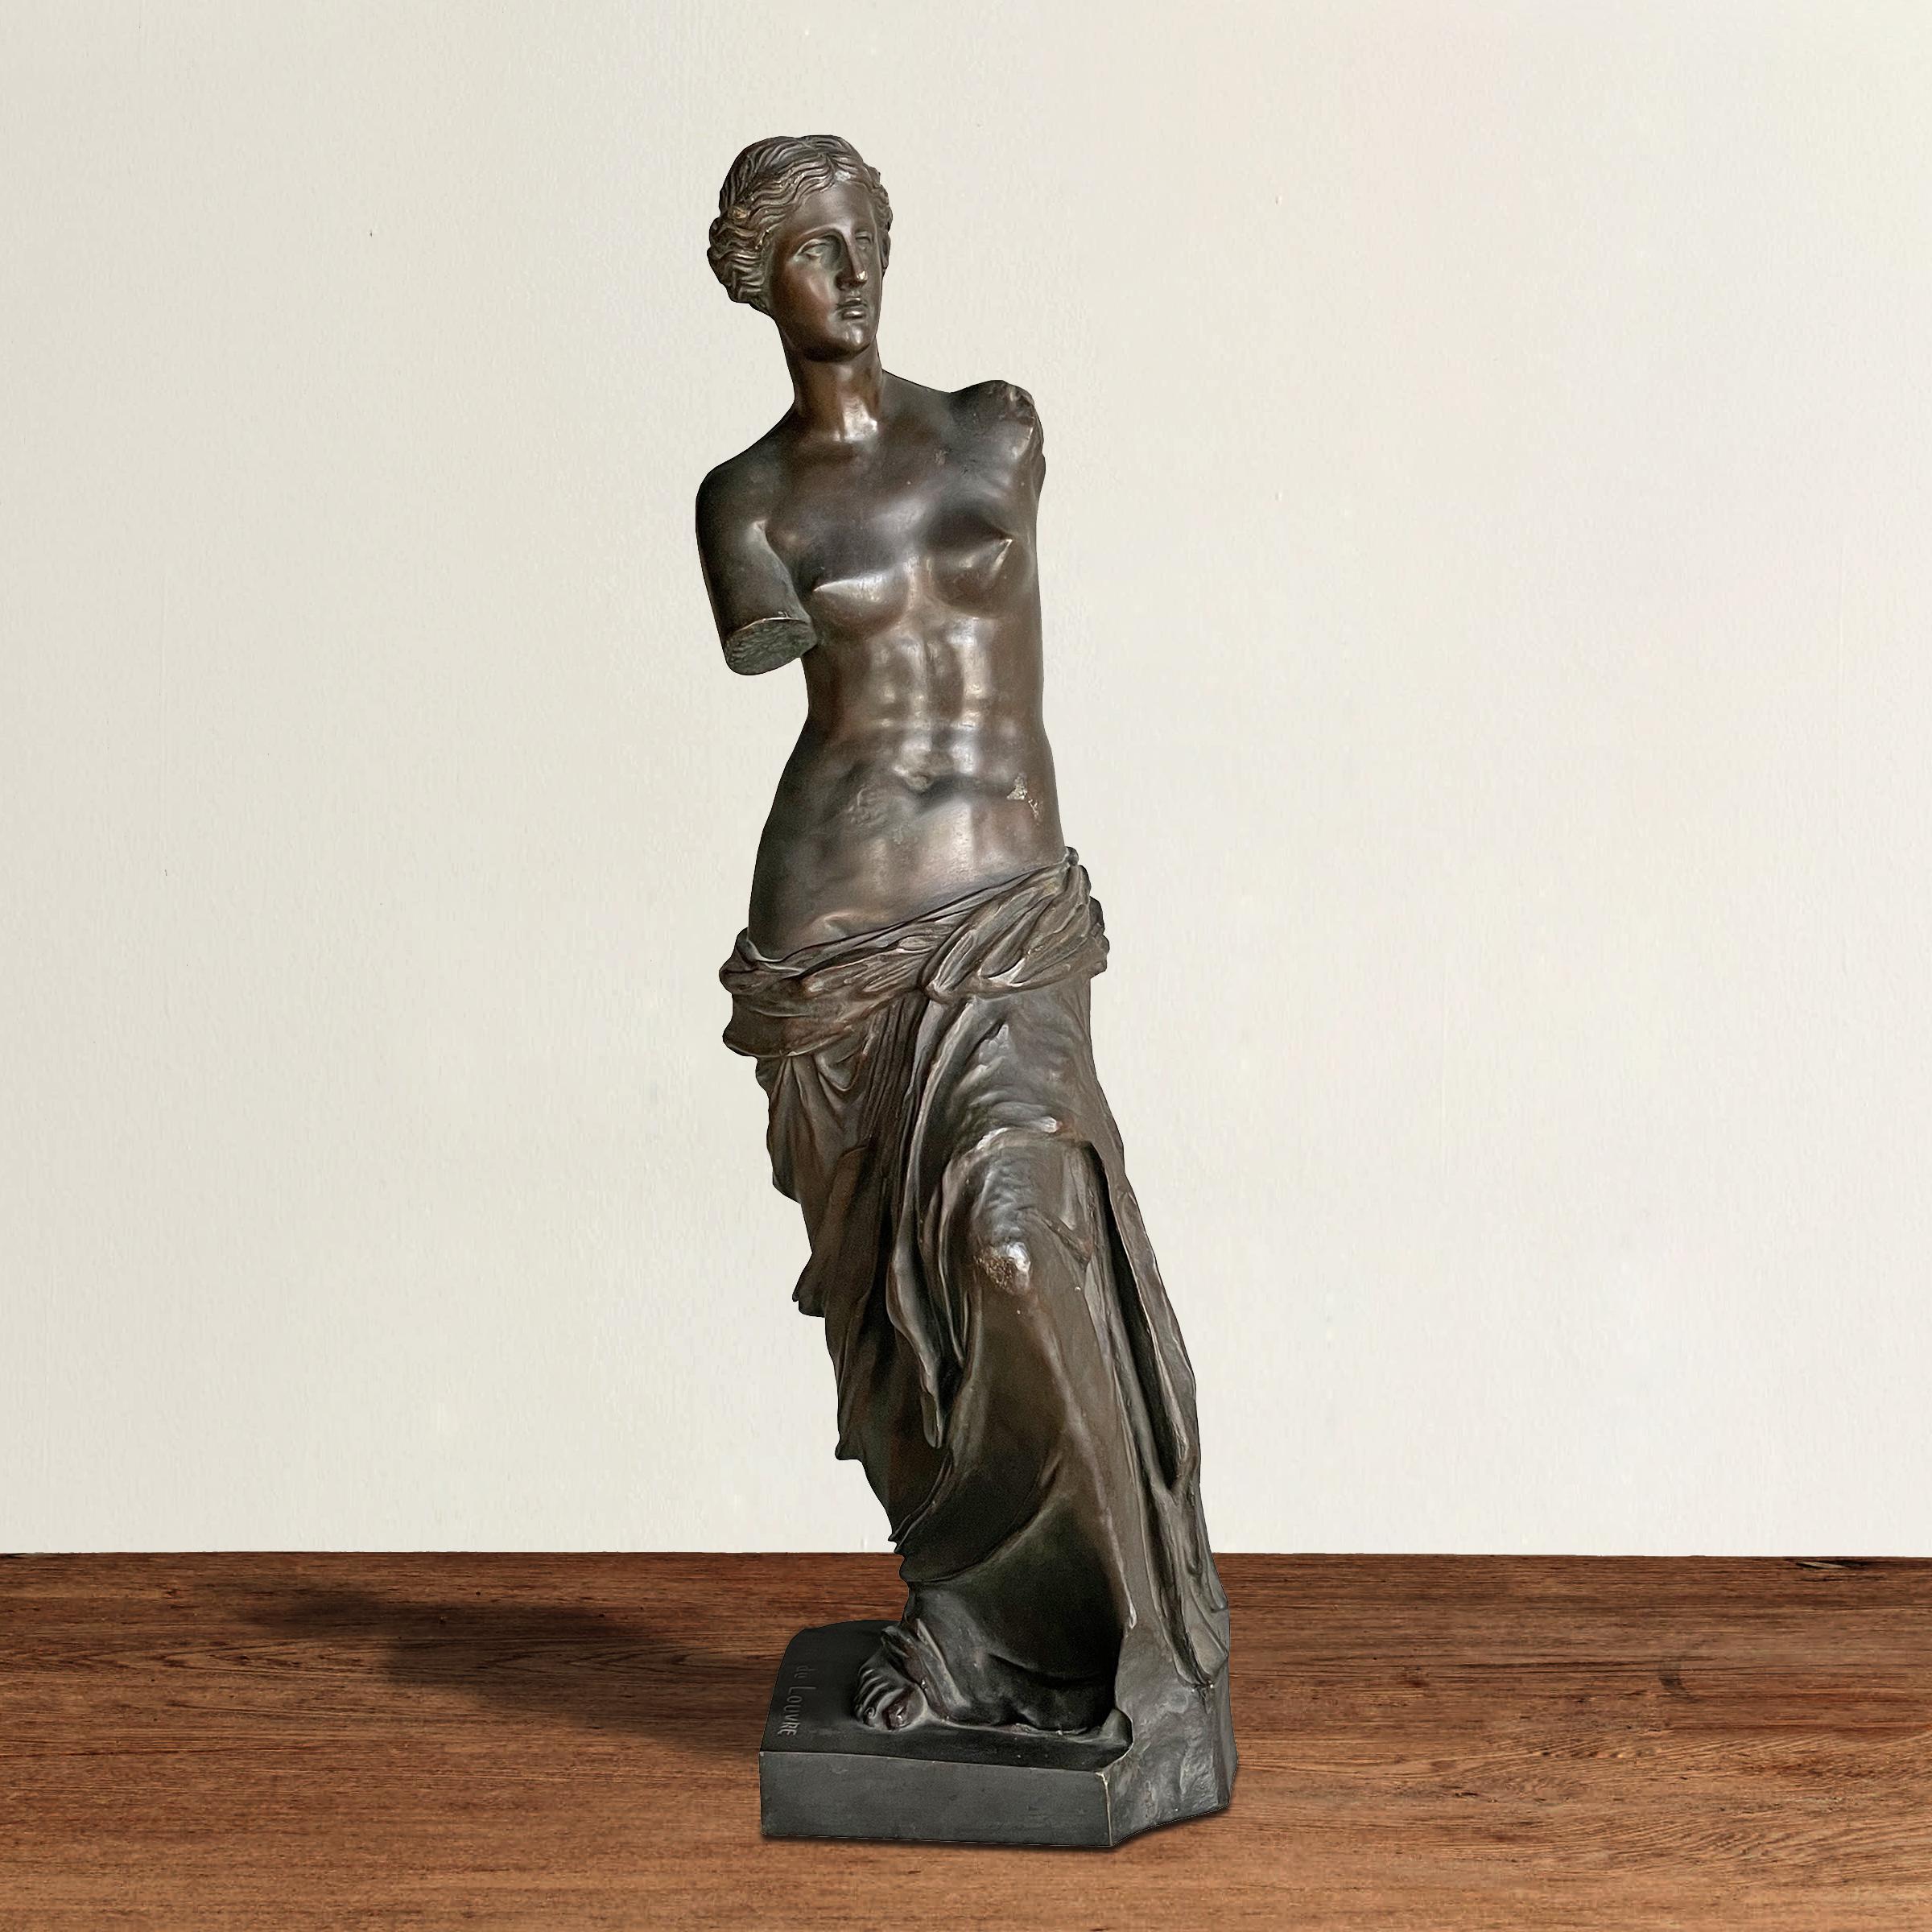 A striking and alluring 19th century French Grand Tour cast bronze sculpture depicting the Ancient Greek goddess Aphrodite, and named for her Roman counterpart, Venus. The original was discovered in 1820 on the island of Milos, hence the name Venus